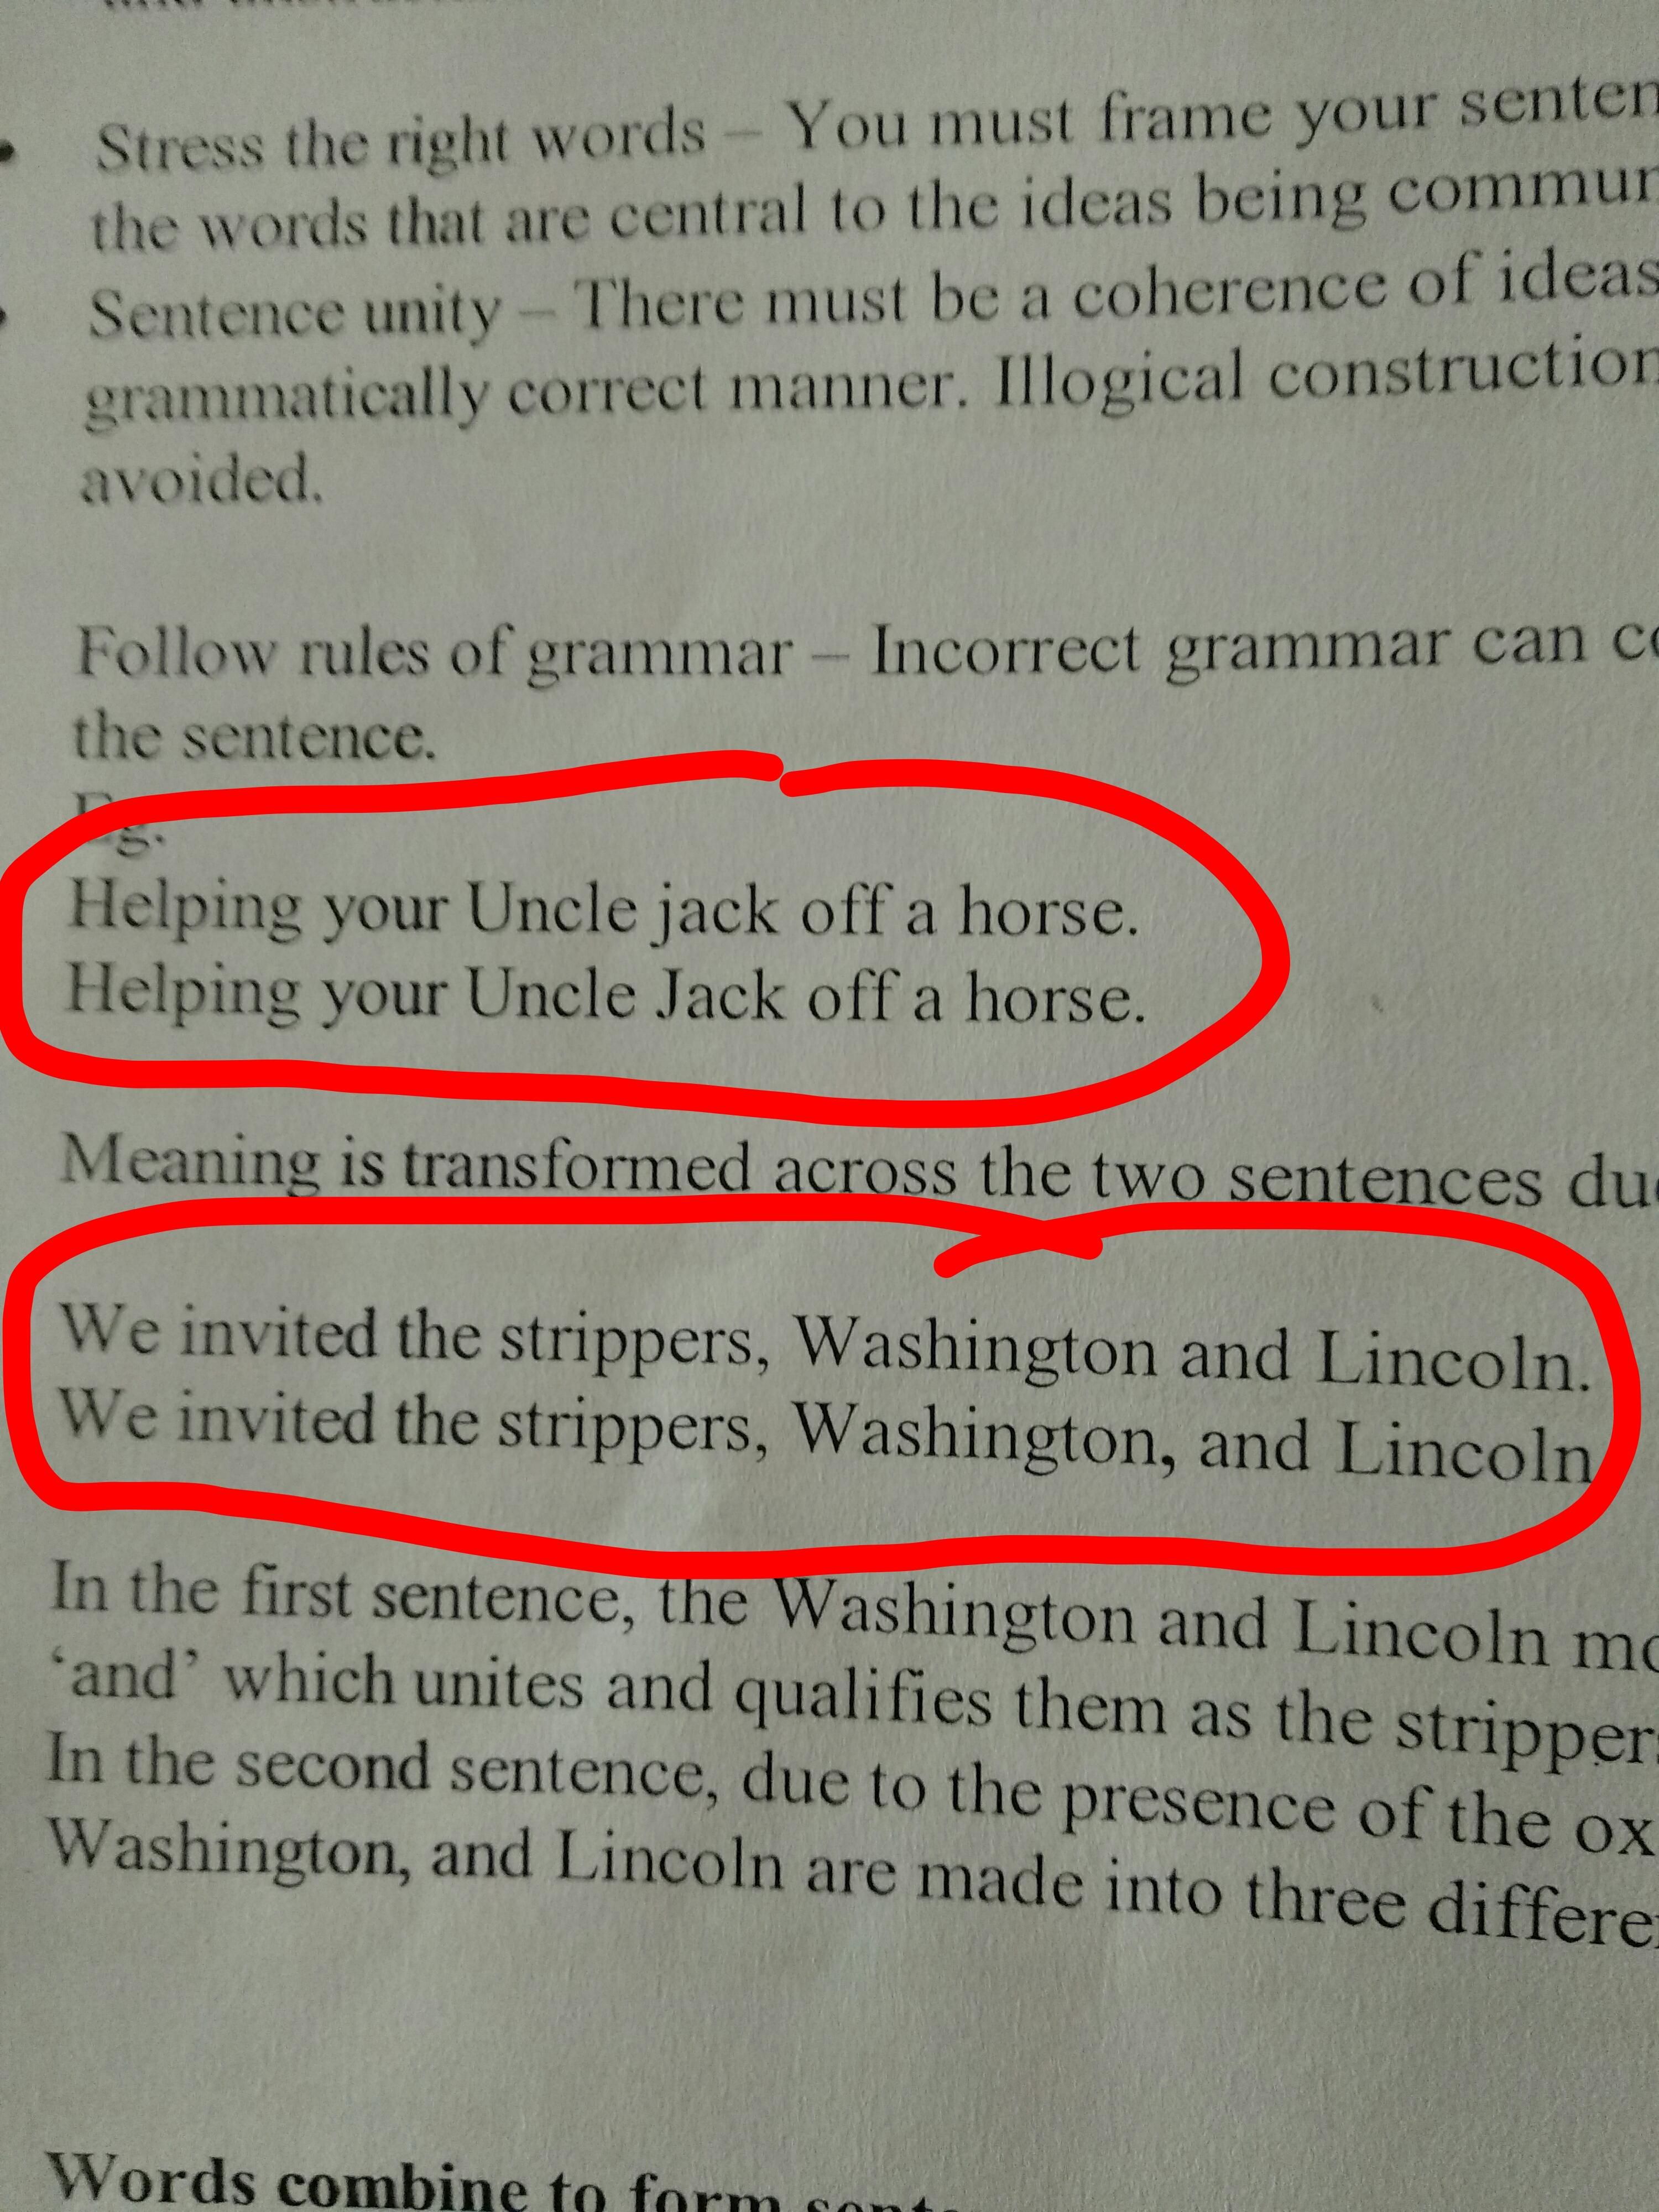 My brother's grammar textbook in India